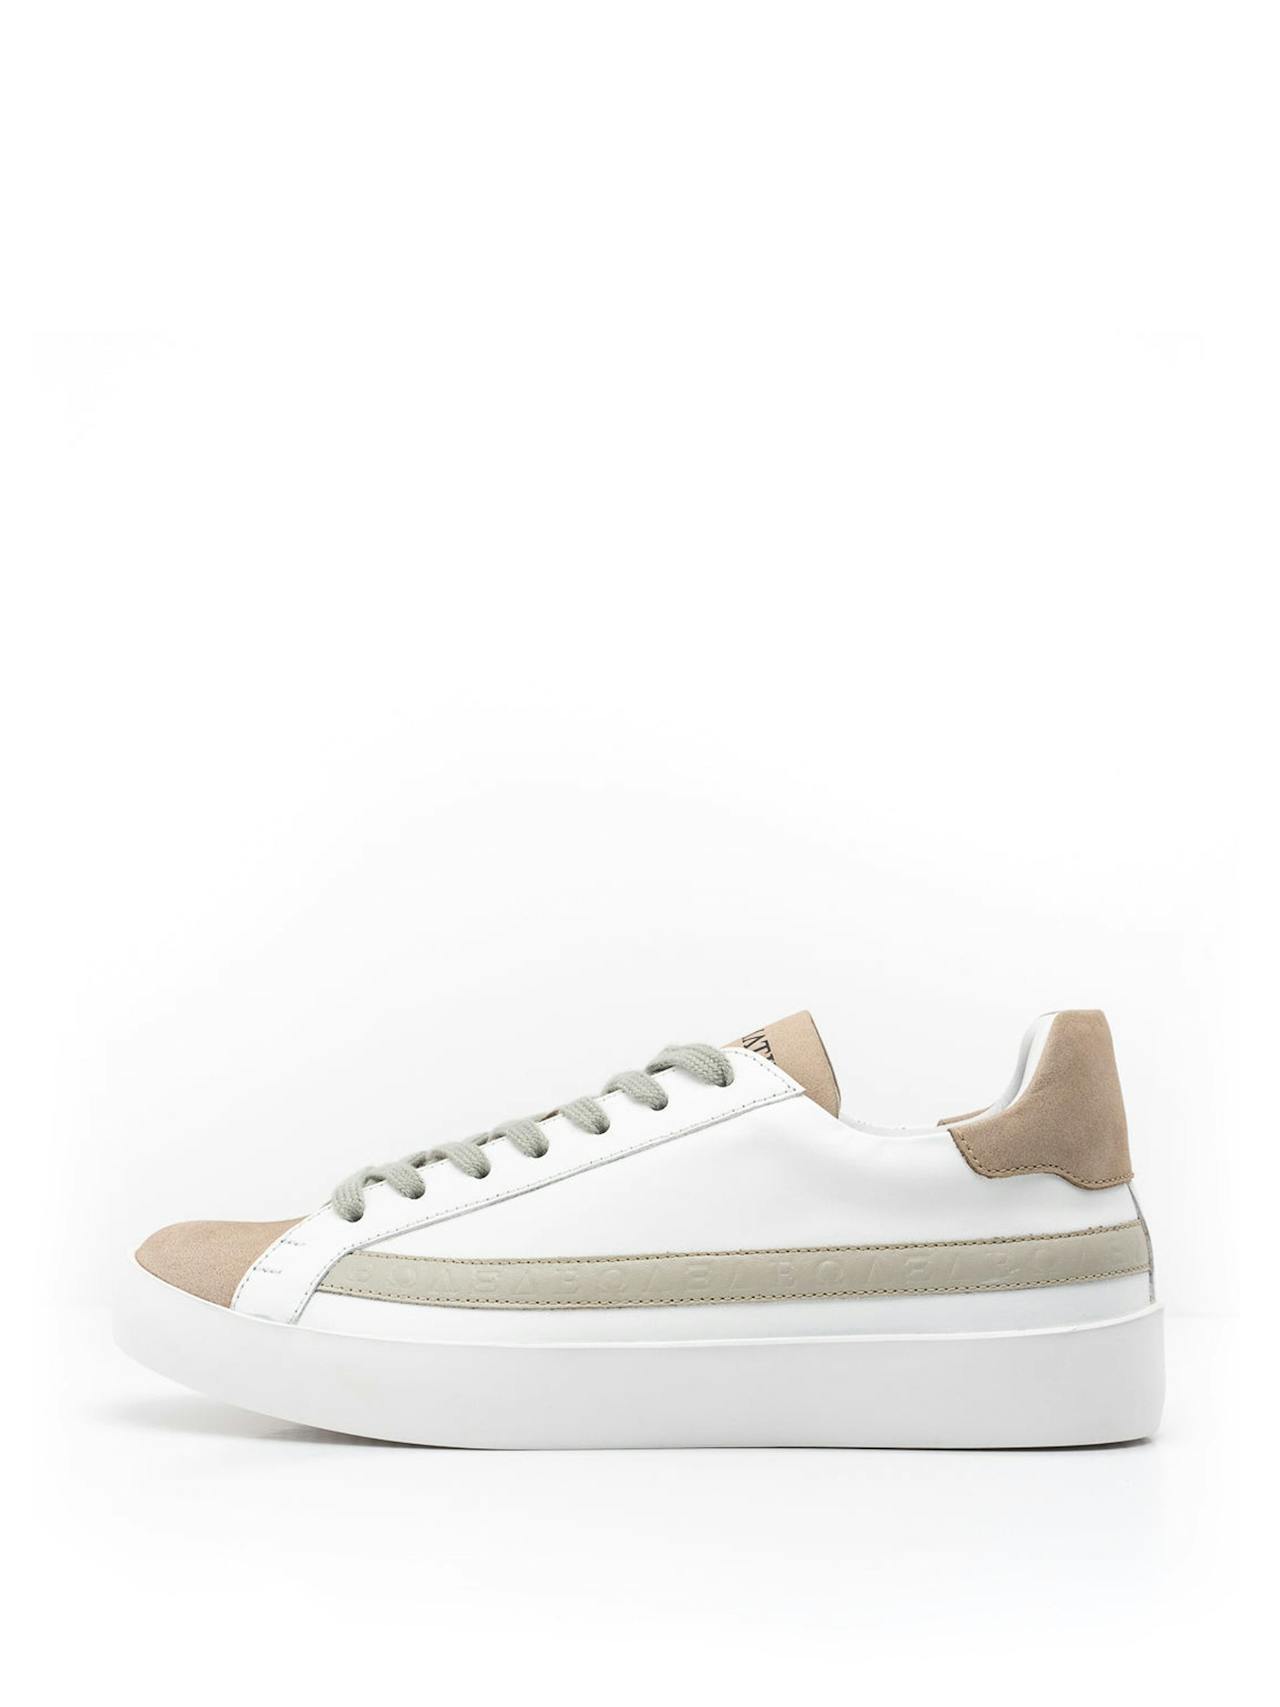 The Lorcan white and beige women's trainers